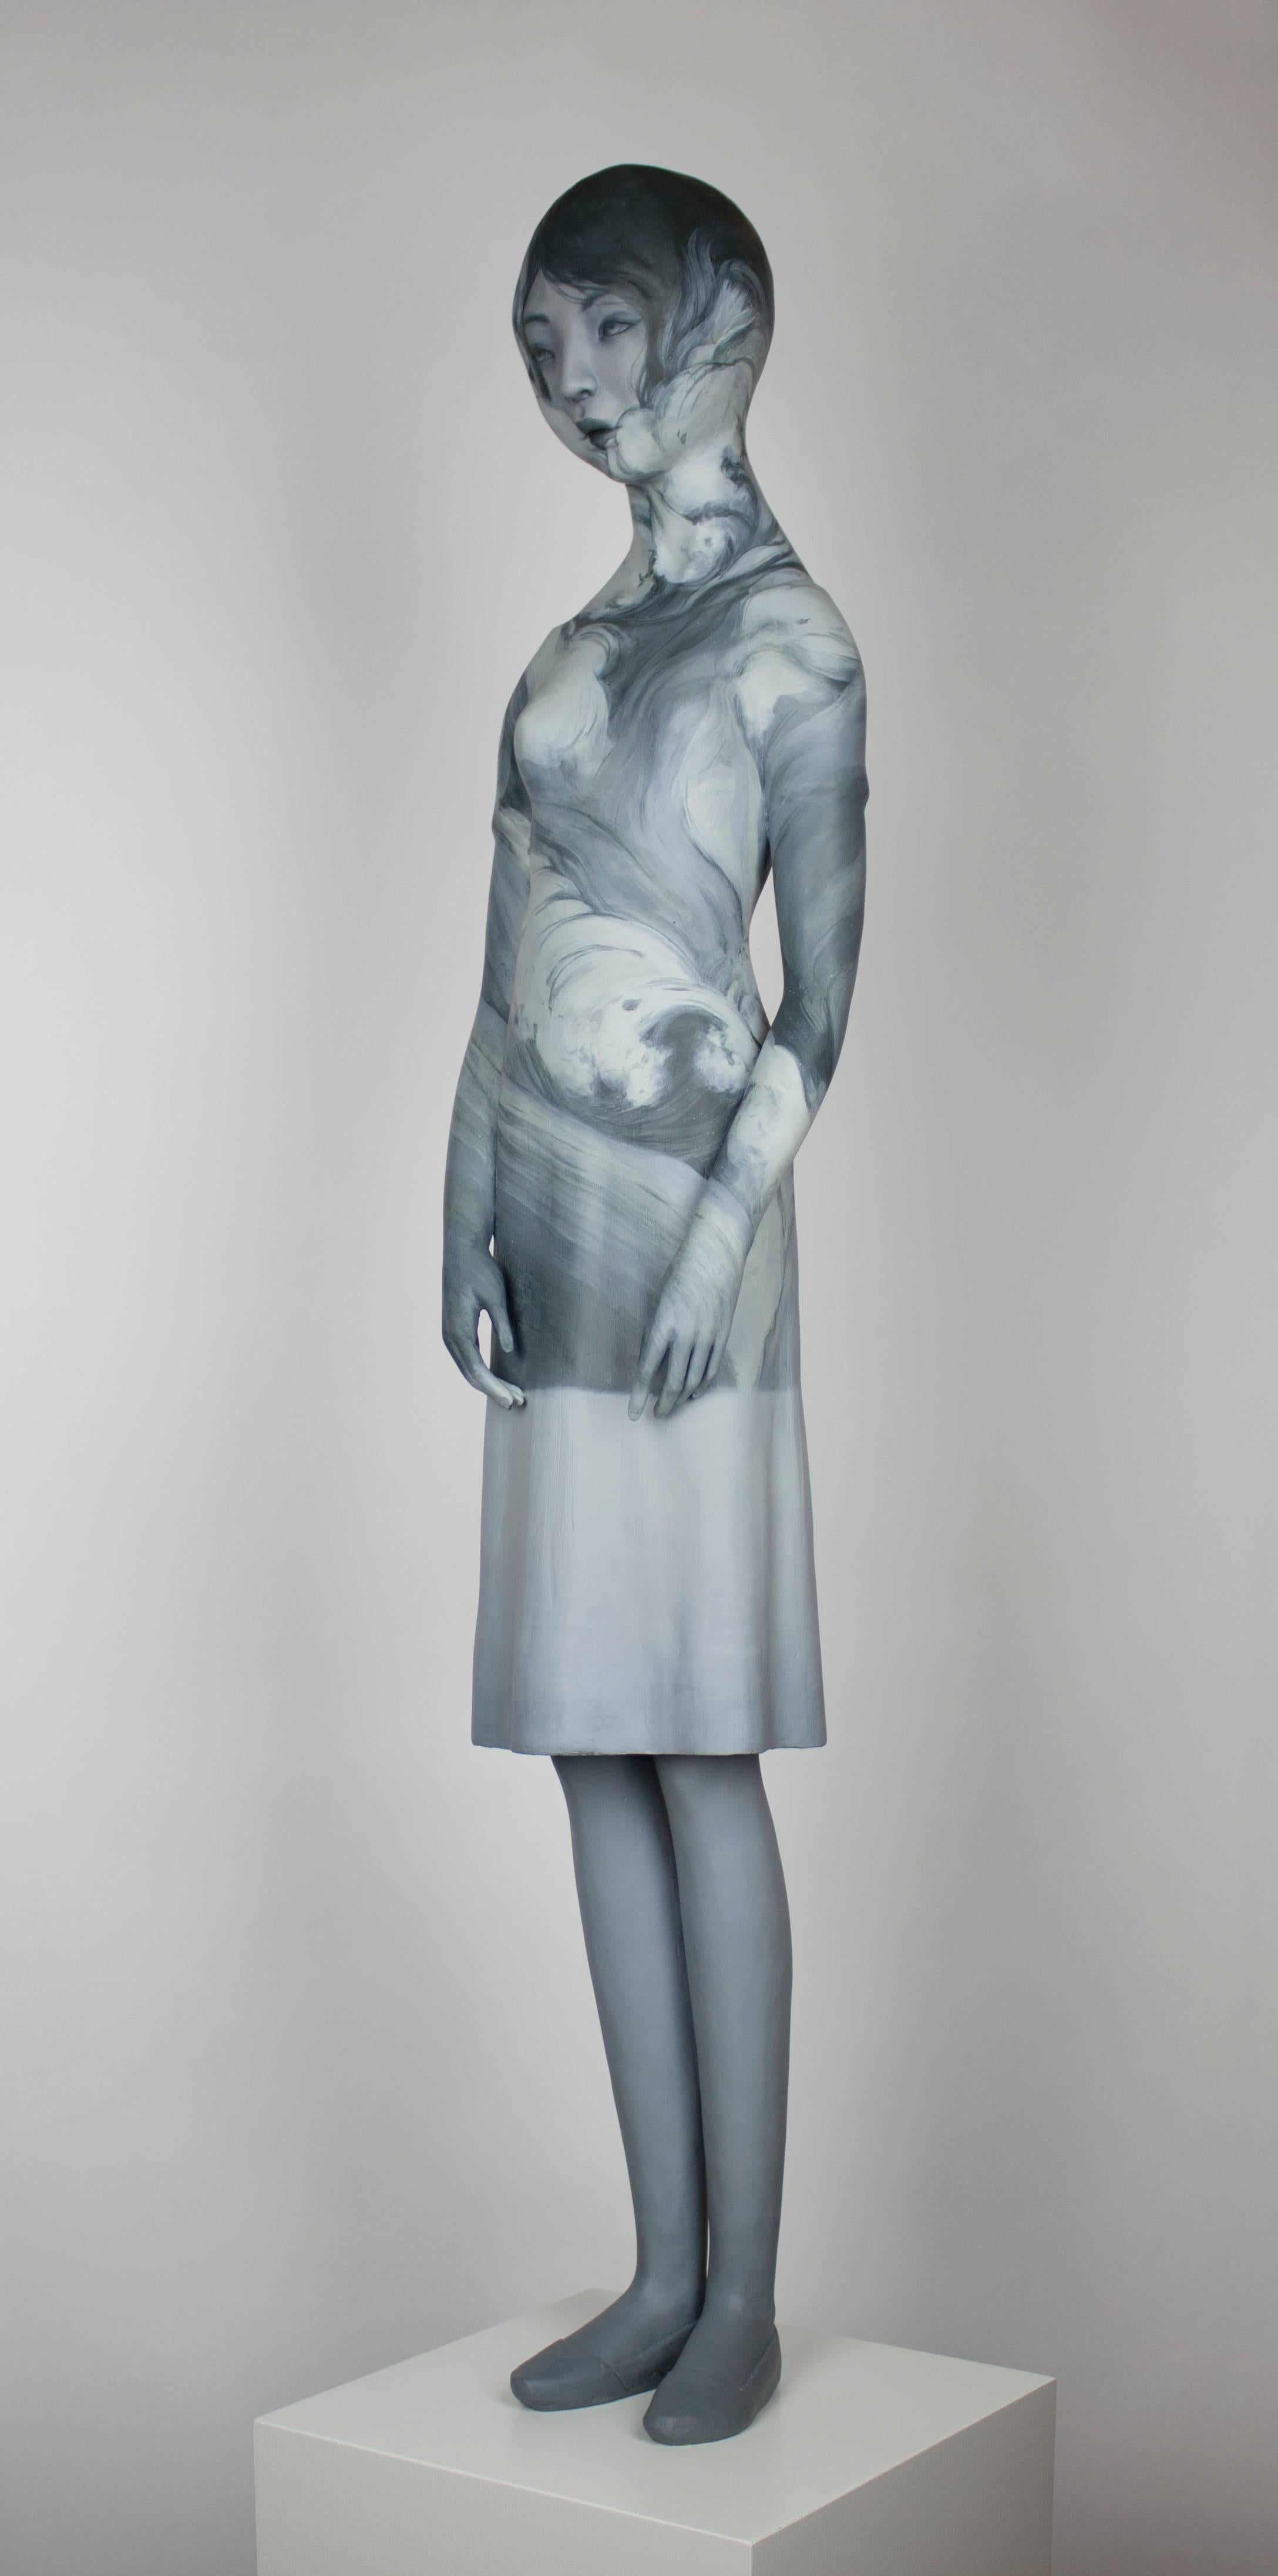 Beneath the Waves - Gray Figurative Sculpture by Gosia